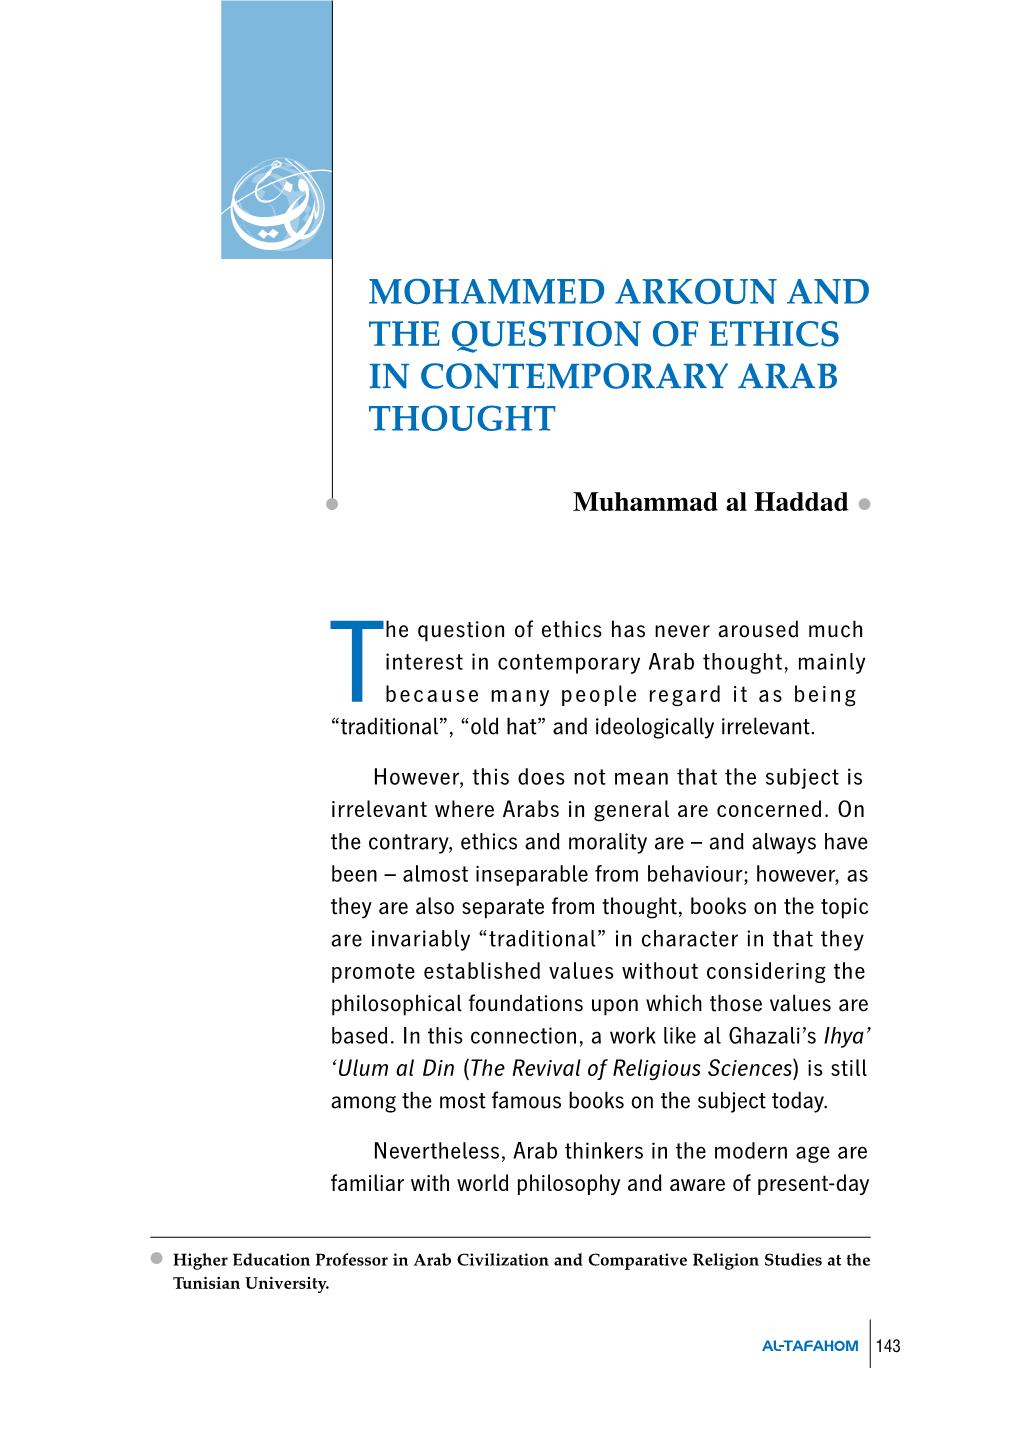 Mohammed Arkoun and the Question of Ethics in Contemporary Arab Thought